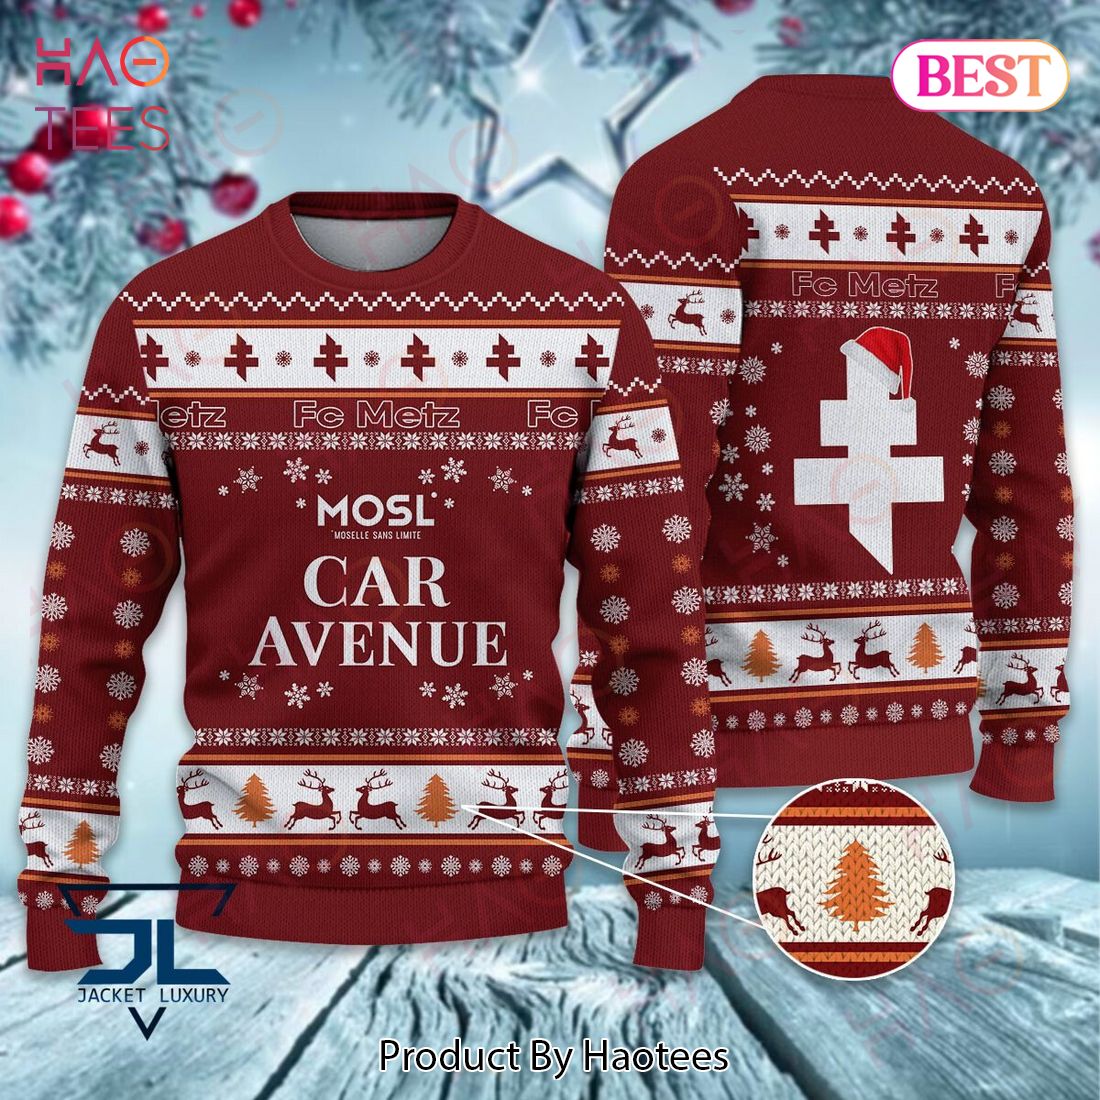 BEST FC Metz Car Avenue Christmas Luxury Brand Sweater Limited Edition